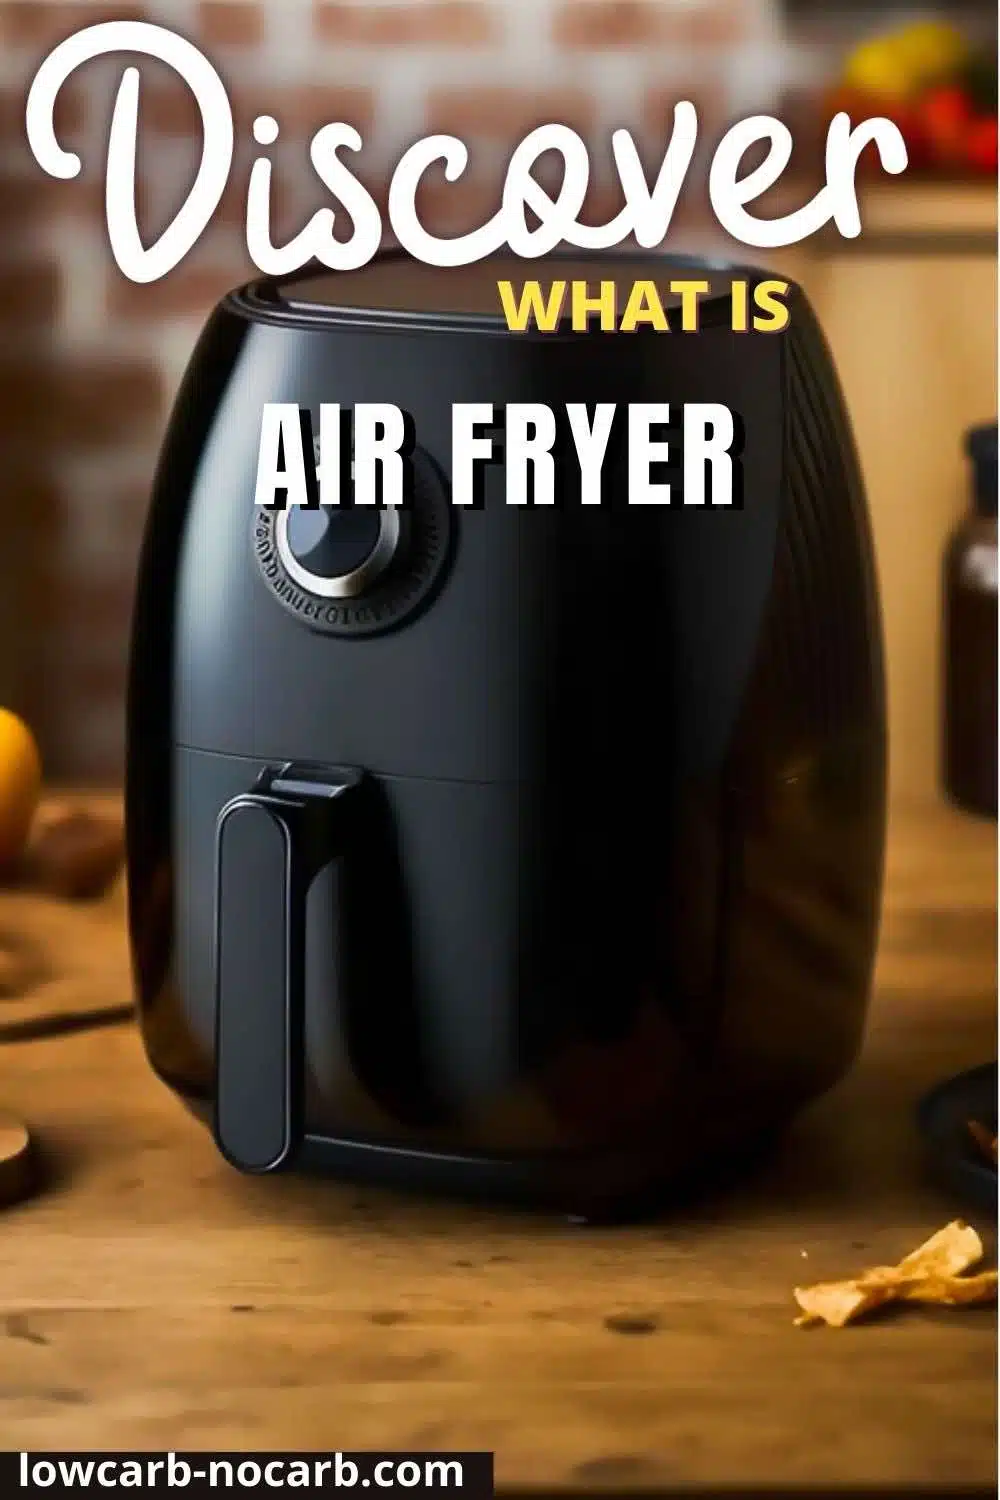 Cooking with air fryer on a wooden table.